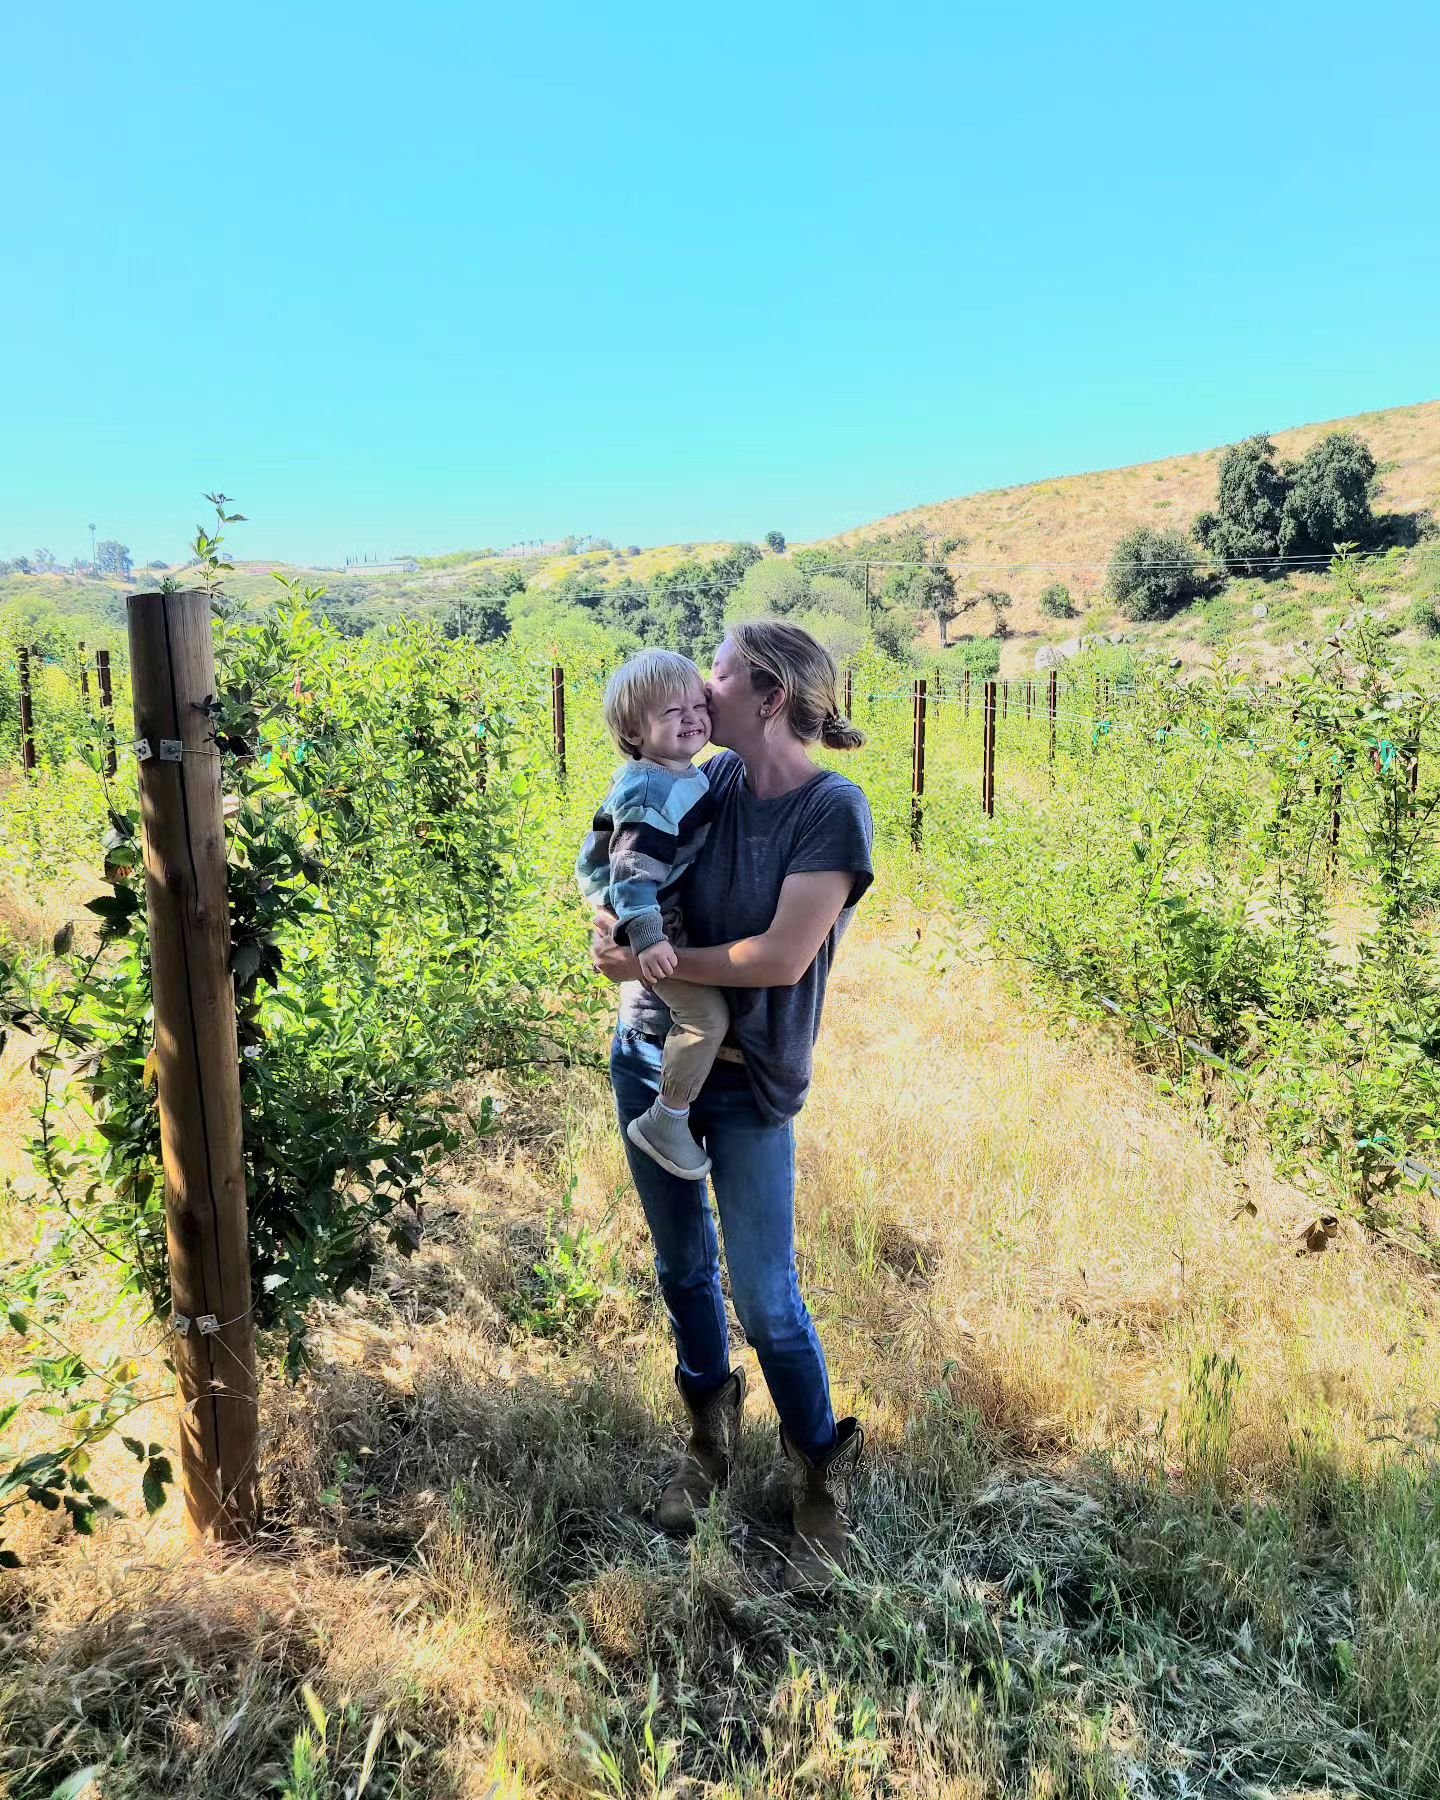 Happy Mothers Day to all the Mamas out there!🌸

We hope you all feel loved &amp; adored on this beautiful day❤️ 

#theblackberryfields #blackberries #temeculaupickfarm #temeculawinecountry